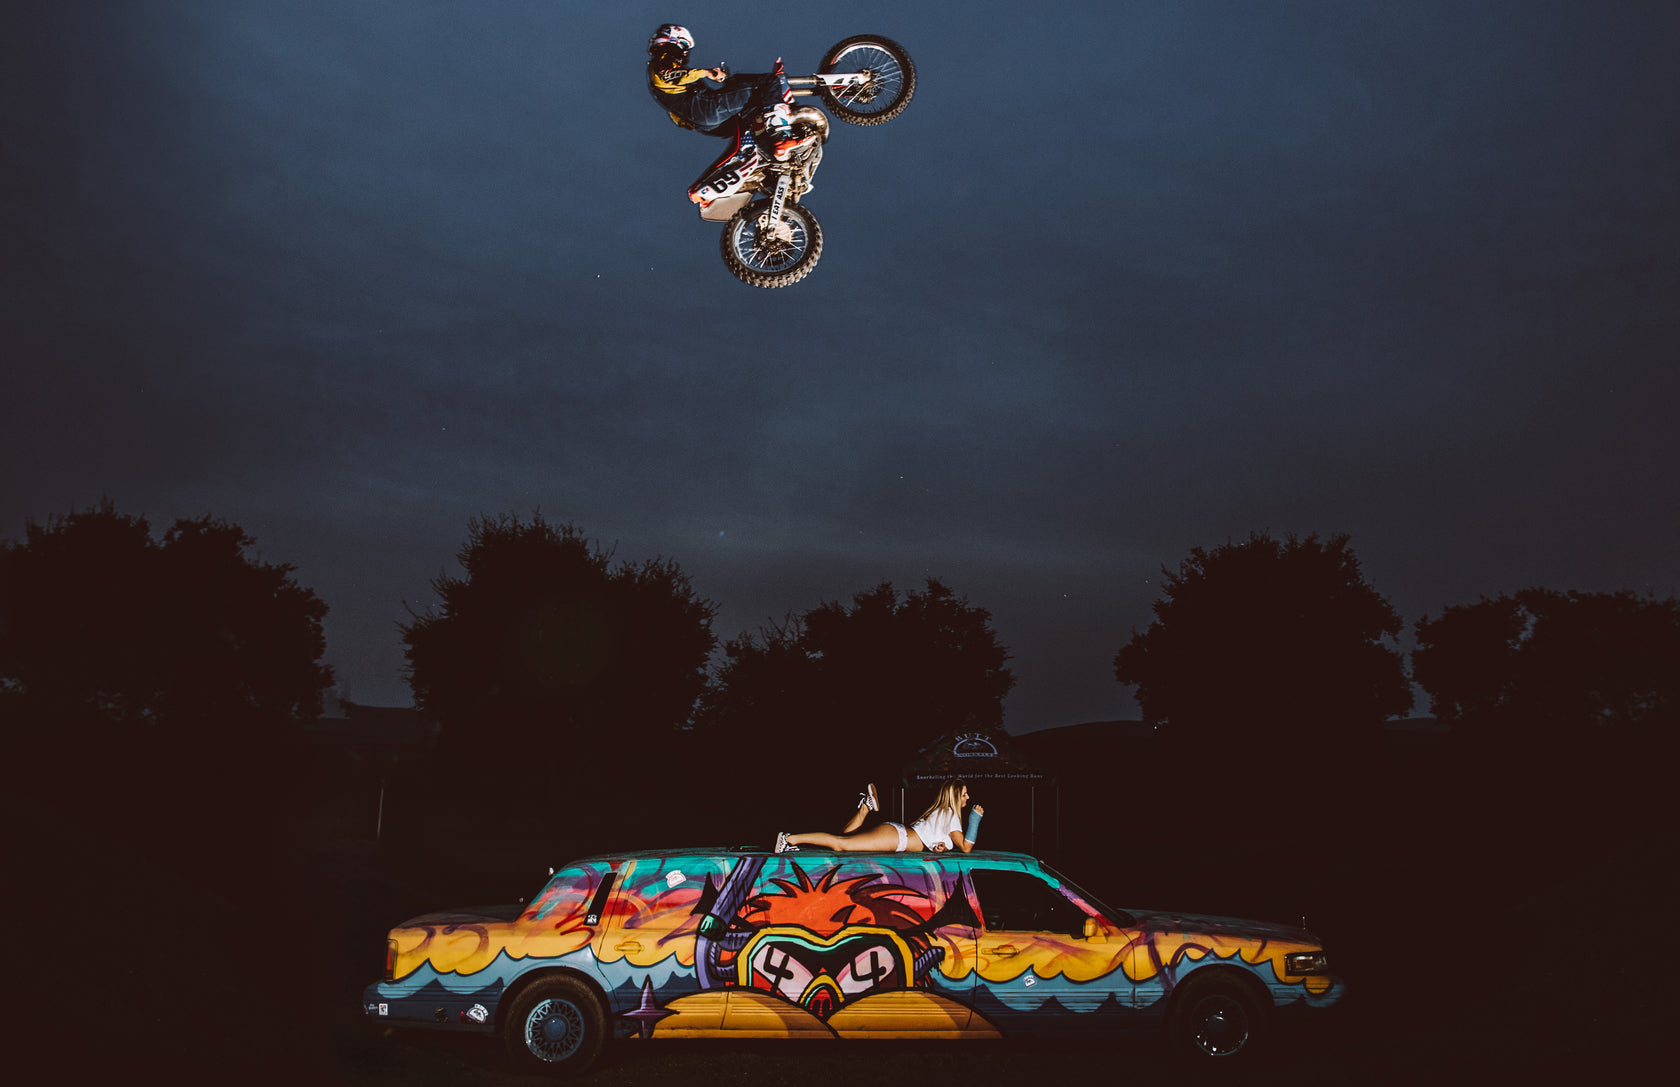 RonnieMac jumping over a limo